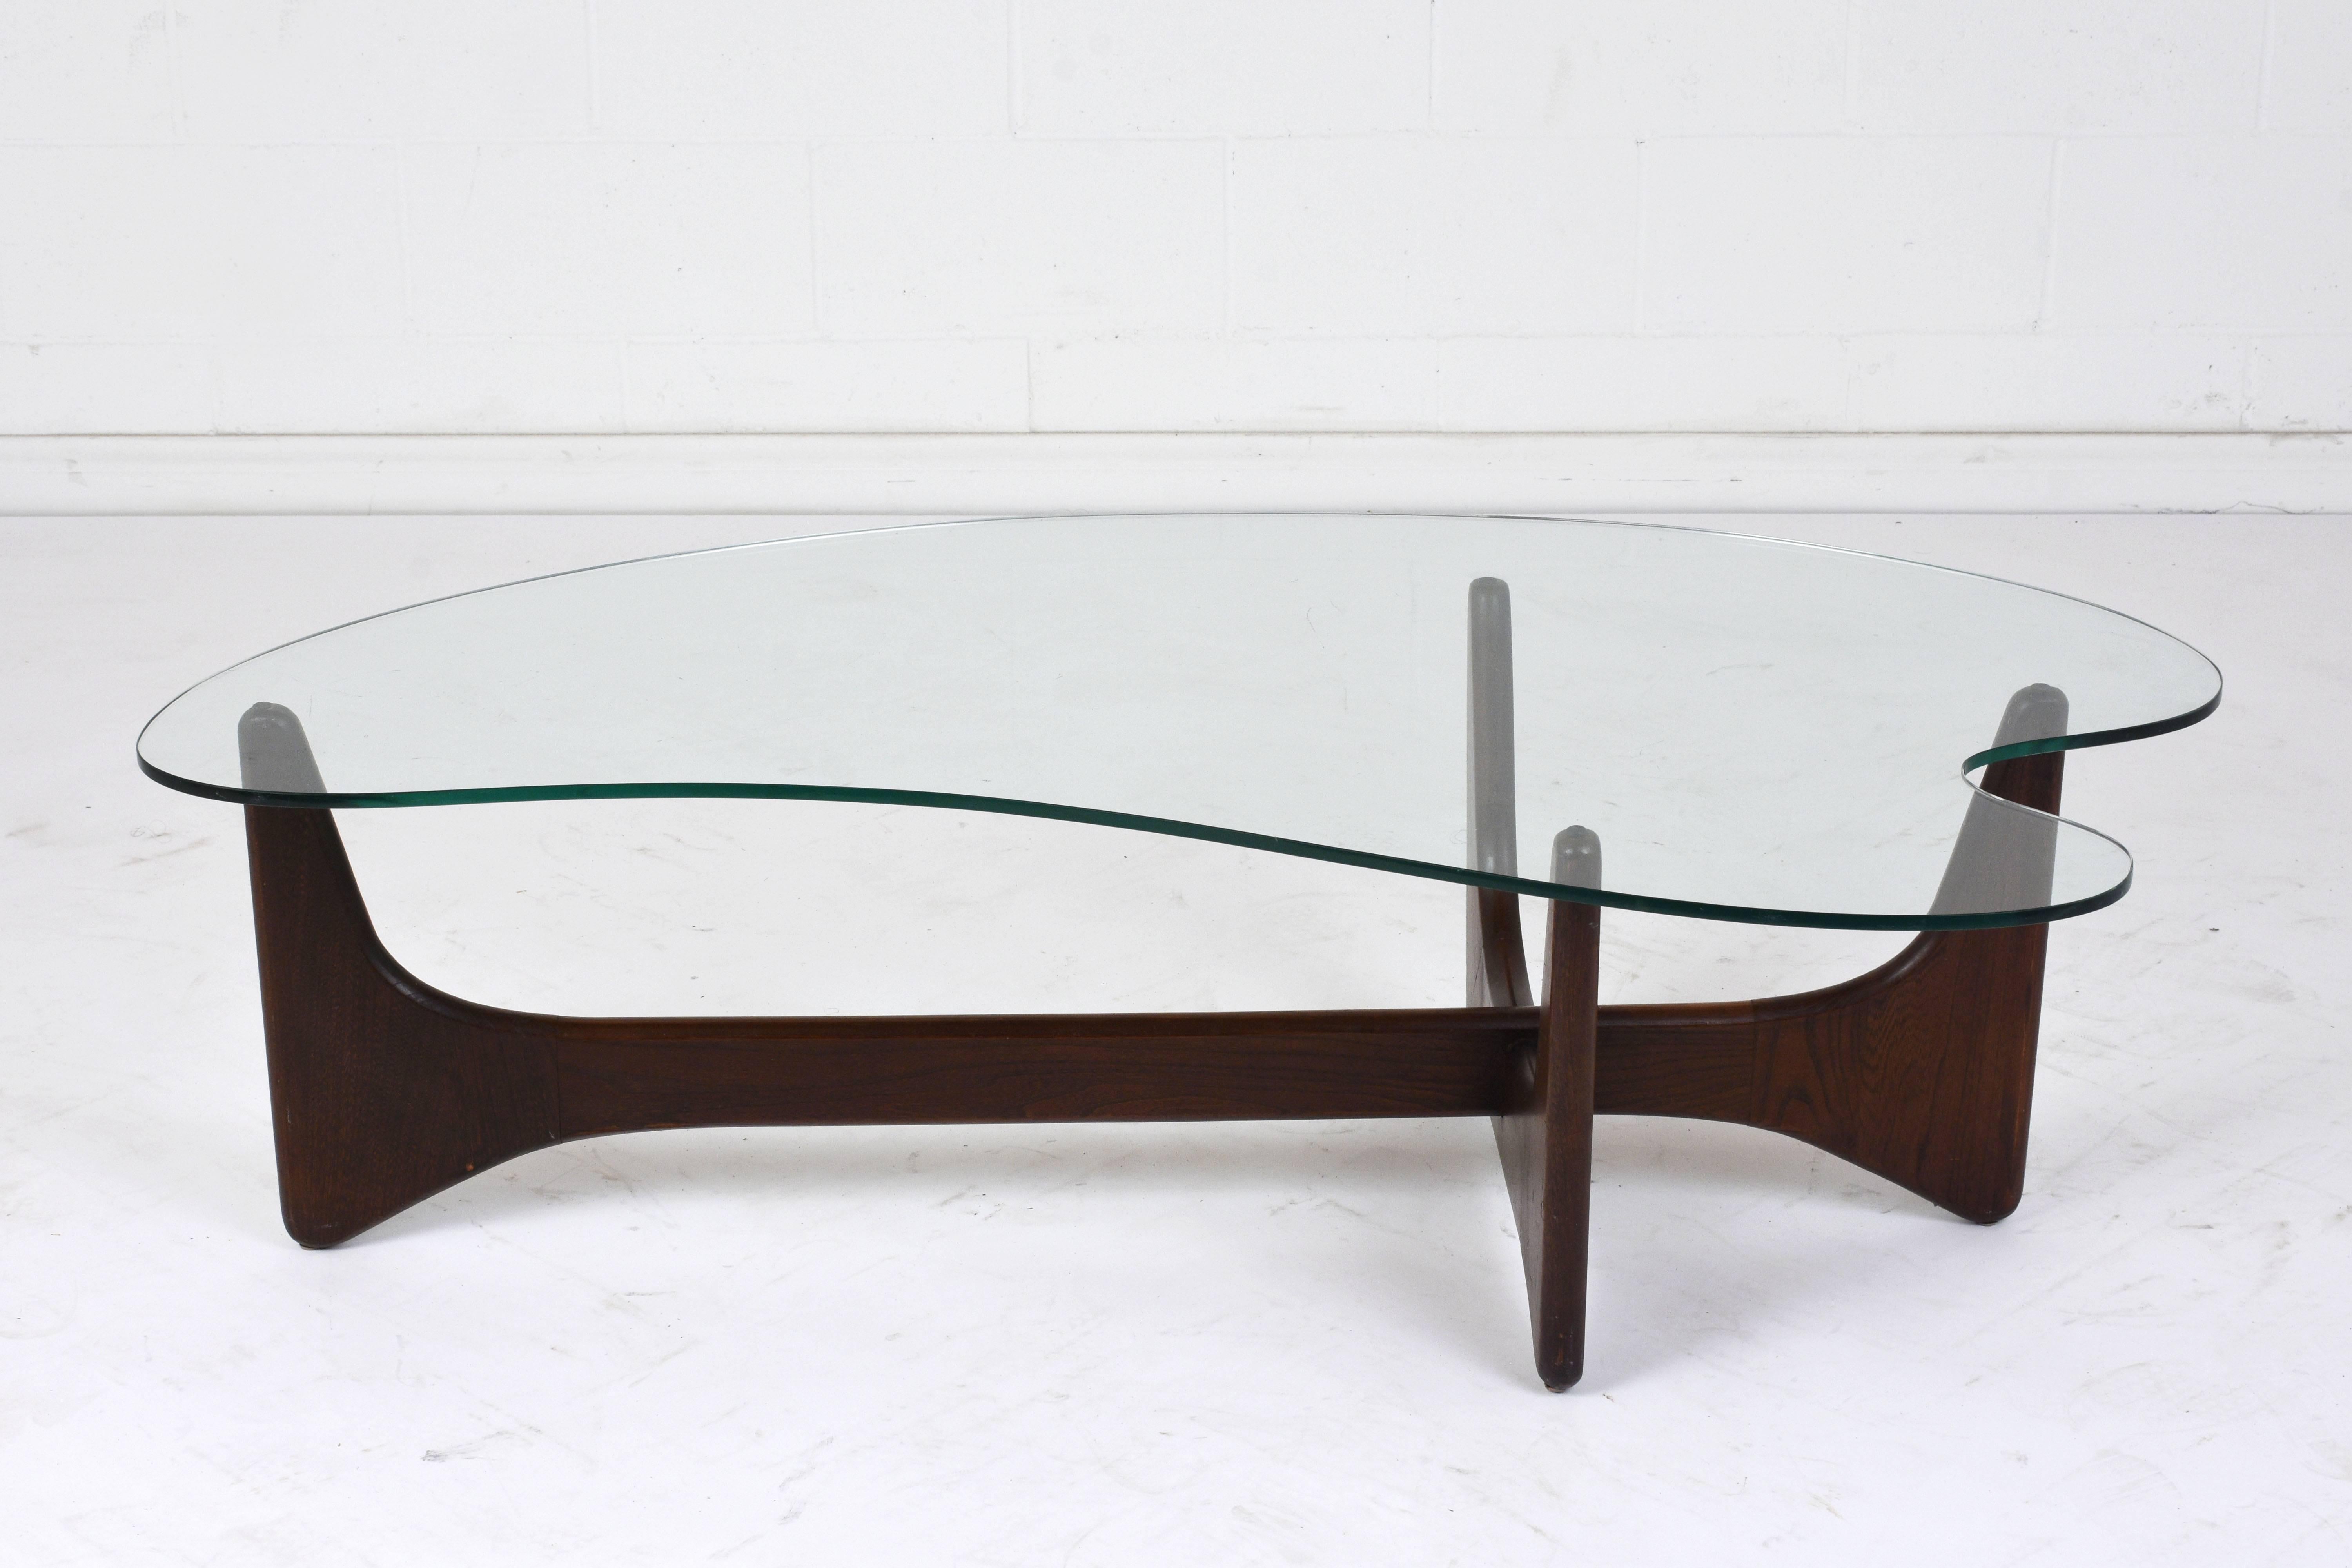 This 1970s Mid-Century Modern style coffee table is made in the style of Adrian Pearsall. The cross shaped walnut wood base features curved edges and is sturdy. The unique shaped glass top resembles an artist's palette. This coffee table is sturdy,